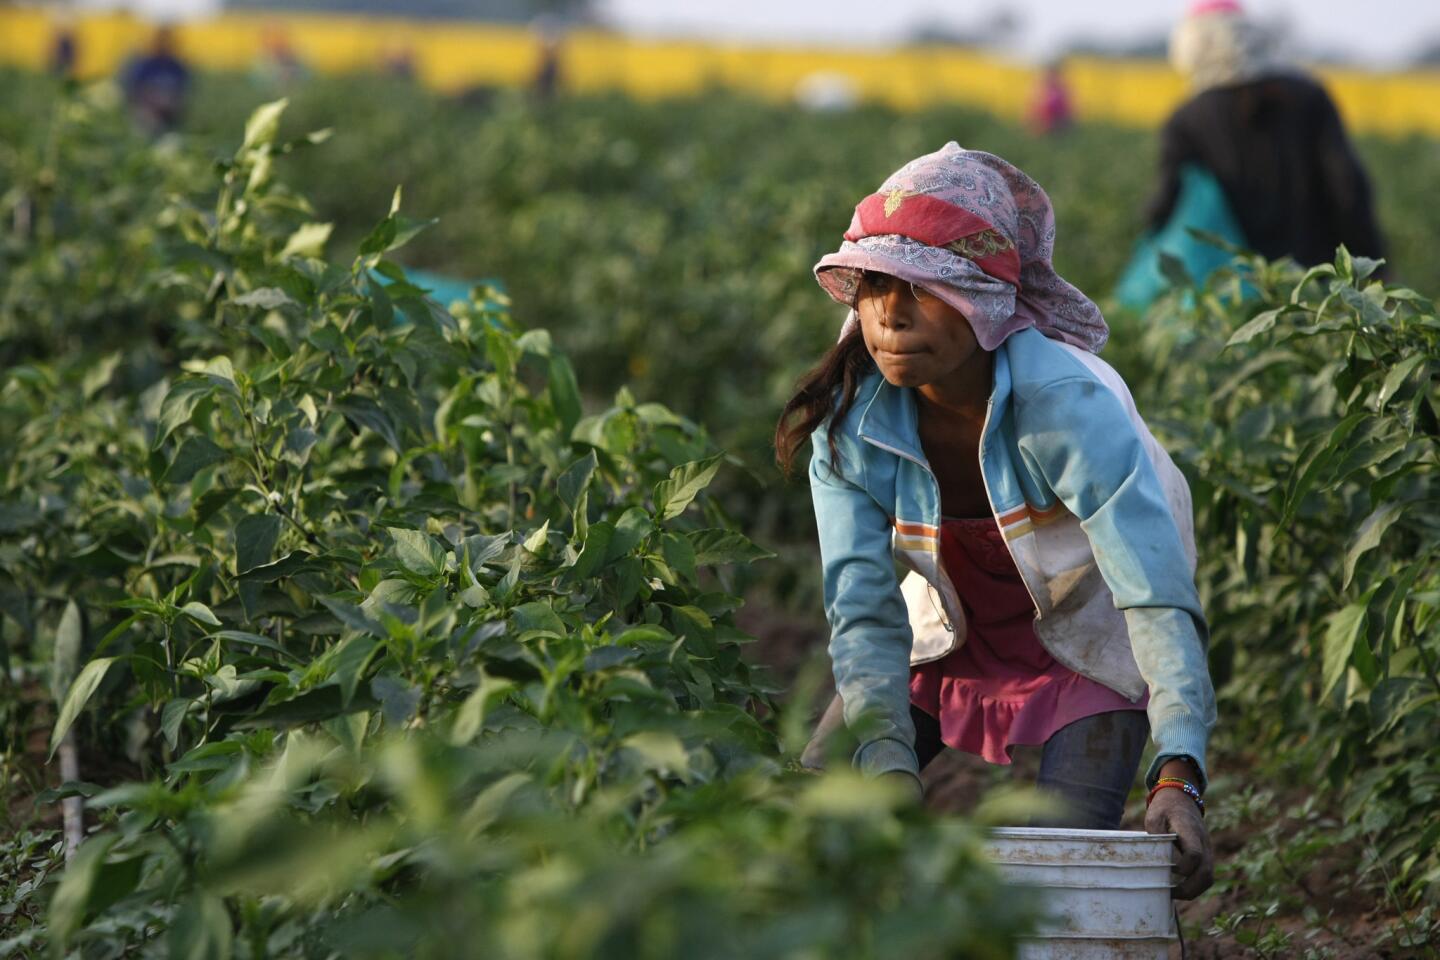 Alejandrina Castillo, 12, picks chile peppers near Teacapan, Sinaloa. She is among an estimated 100,000 children across Mexico who toil in the fields.